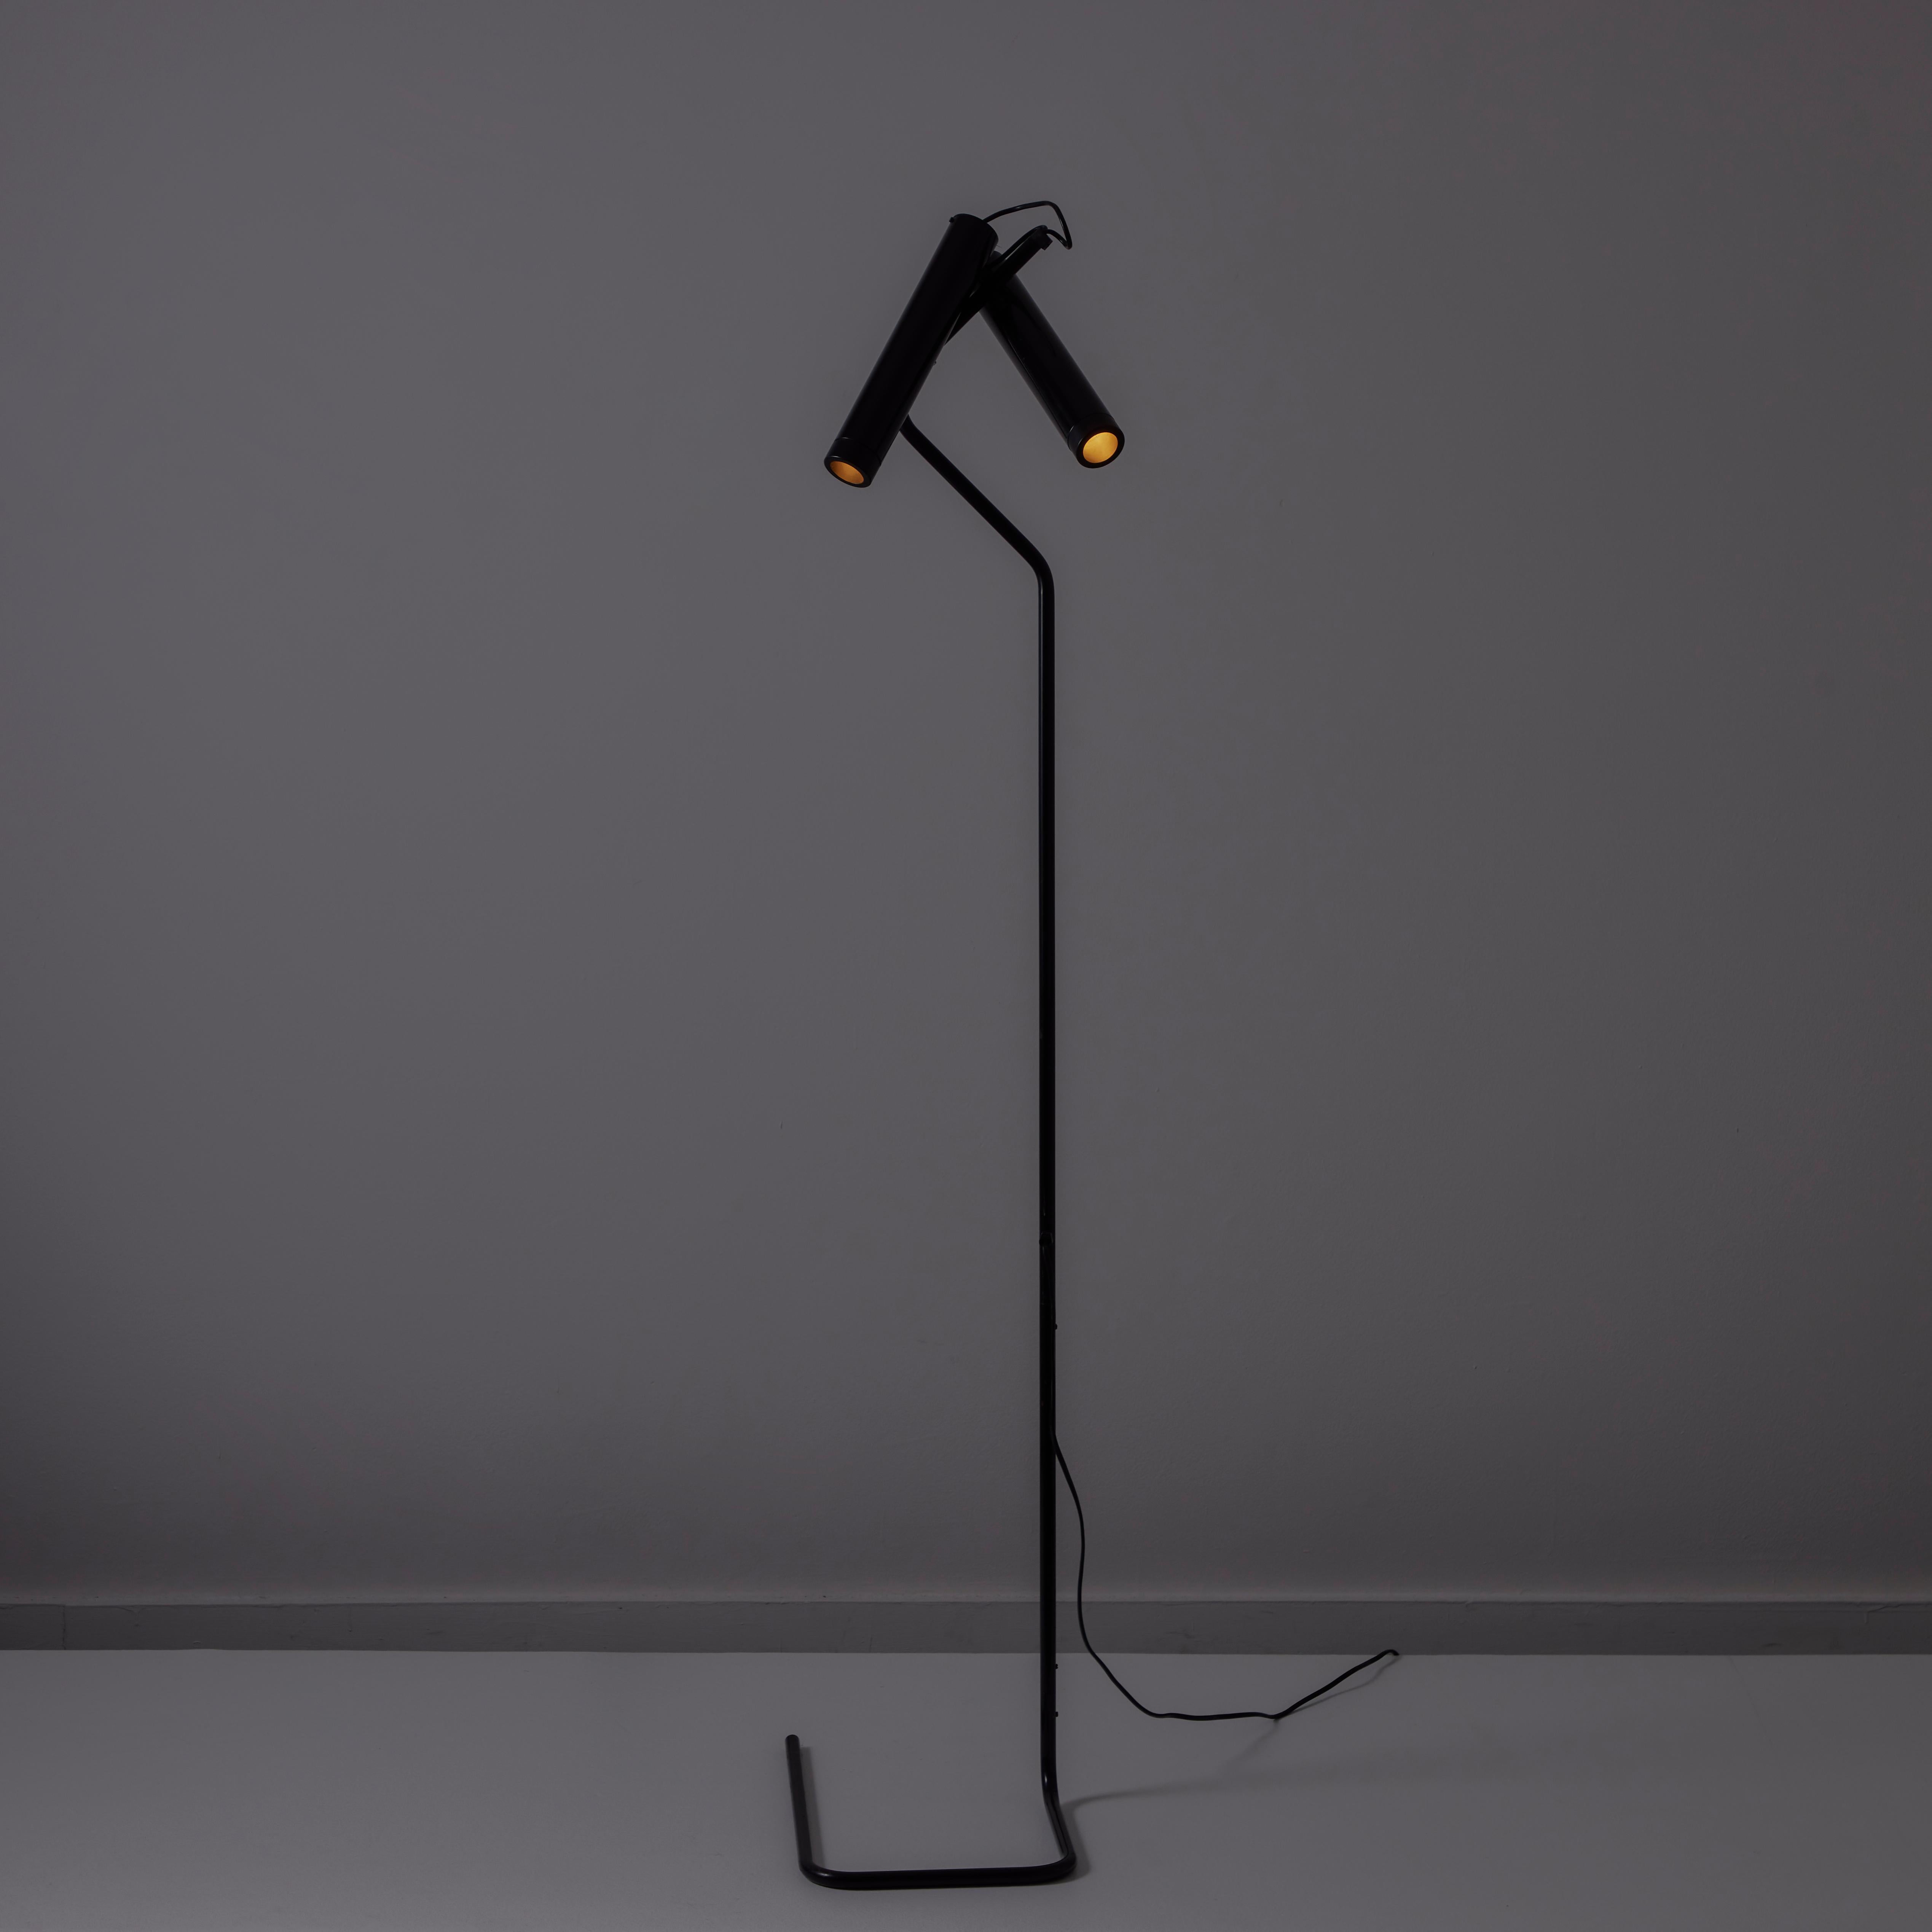 Model 321 'Idomedue' Floor Lamp by Vico Magistretti for Oluce. Designed and manufactured in Italy, circa the 1980s. A dual spotlight floor lamp comprising a minimalistic tubular base, stem system, and two cylindrical spotlights. The spotlights can